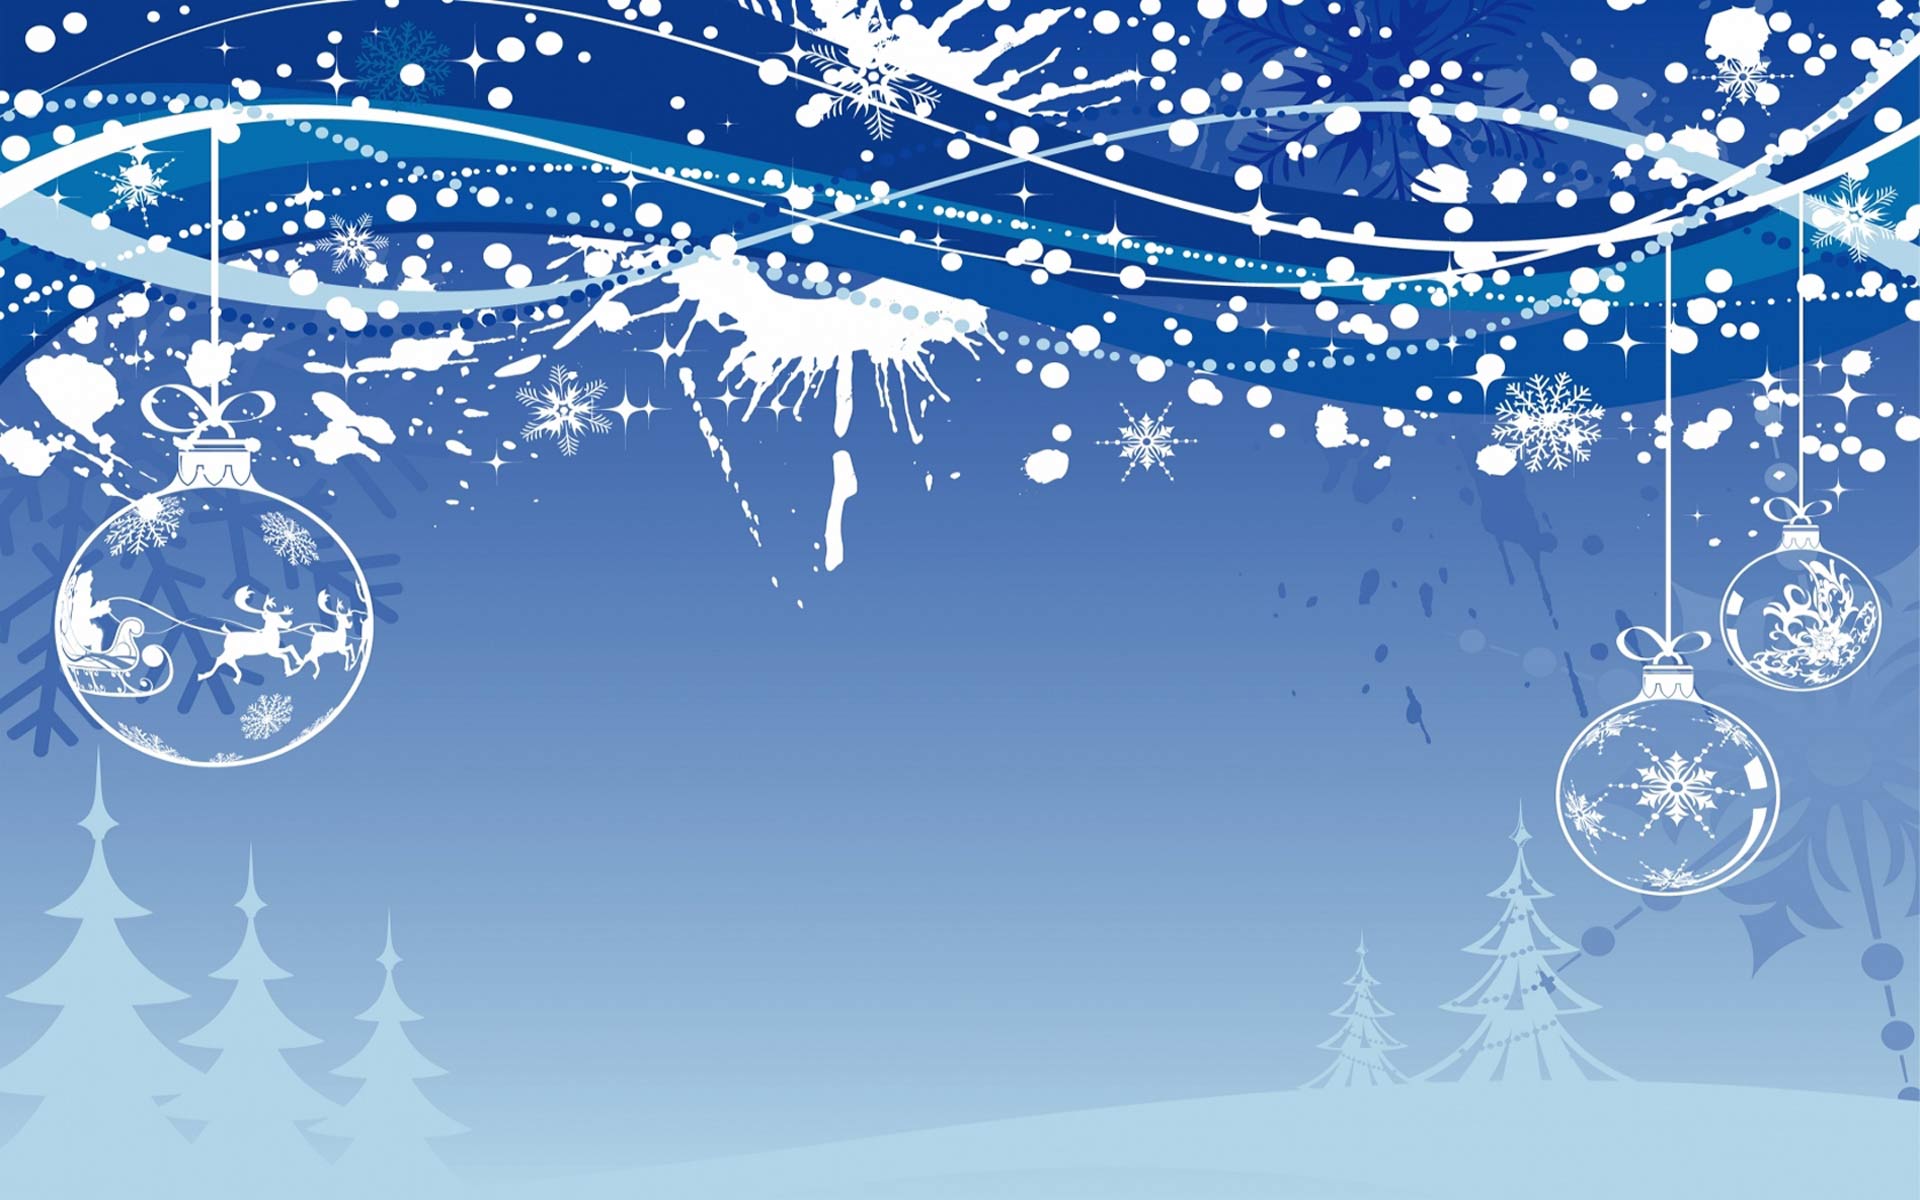 Free Christmas Backgrounds Free For Desktop #7026560